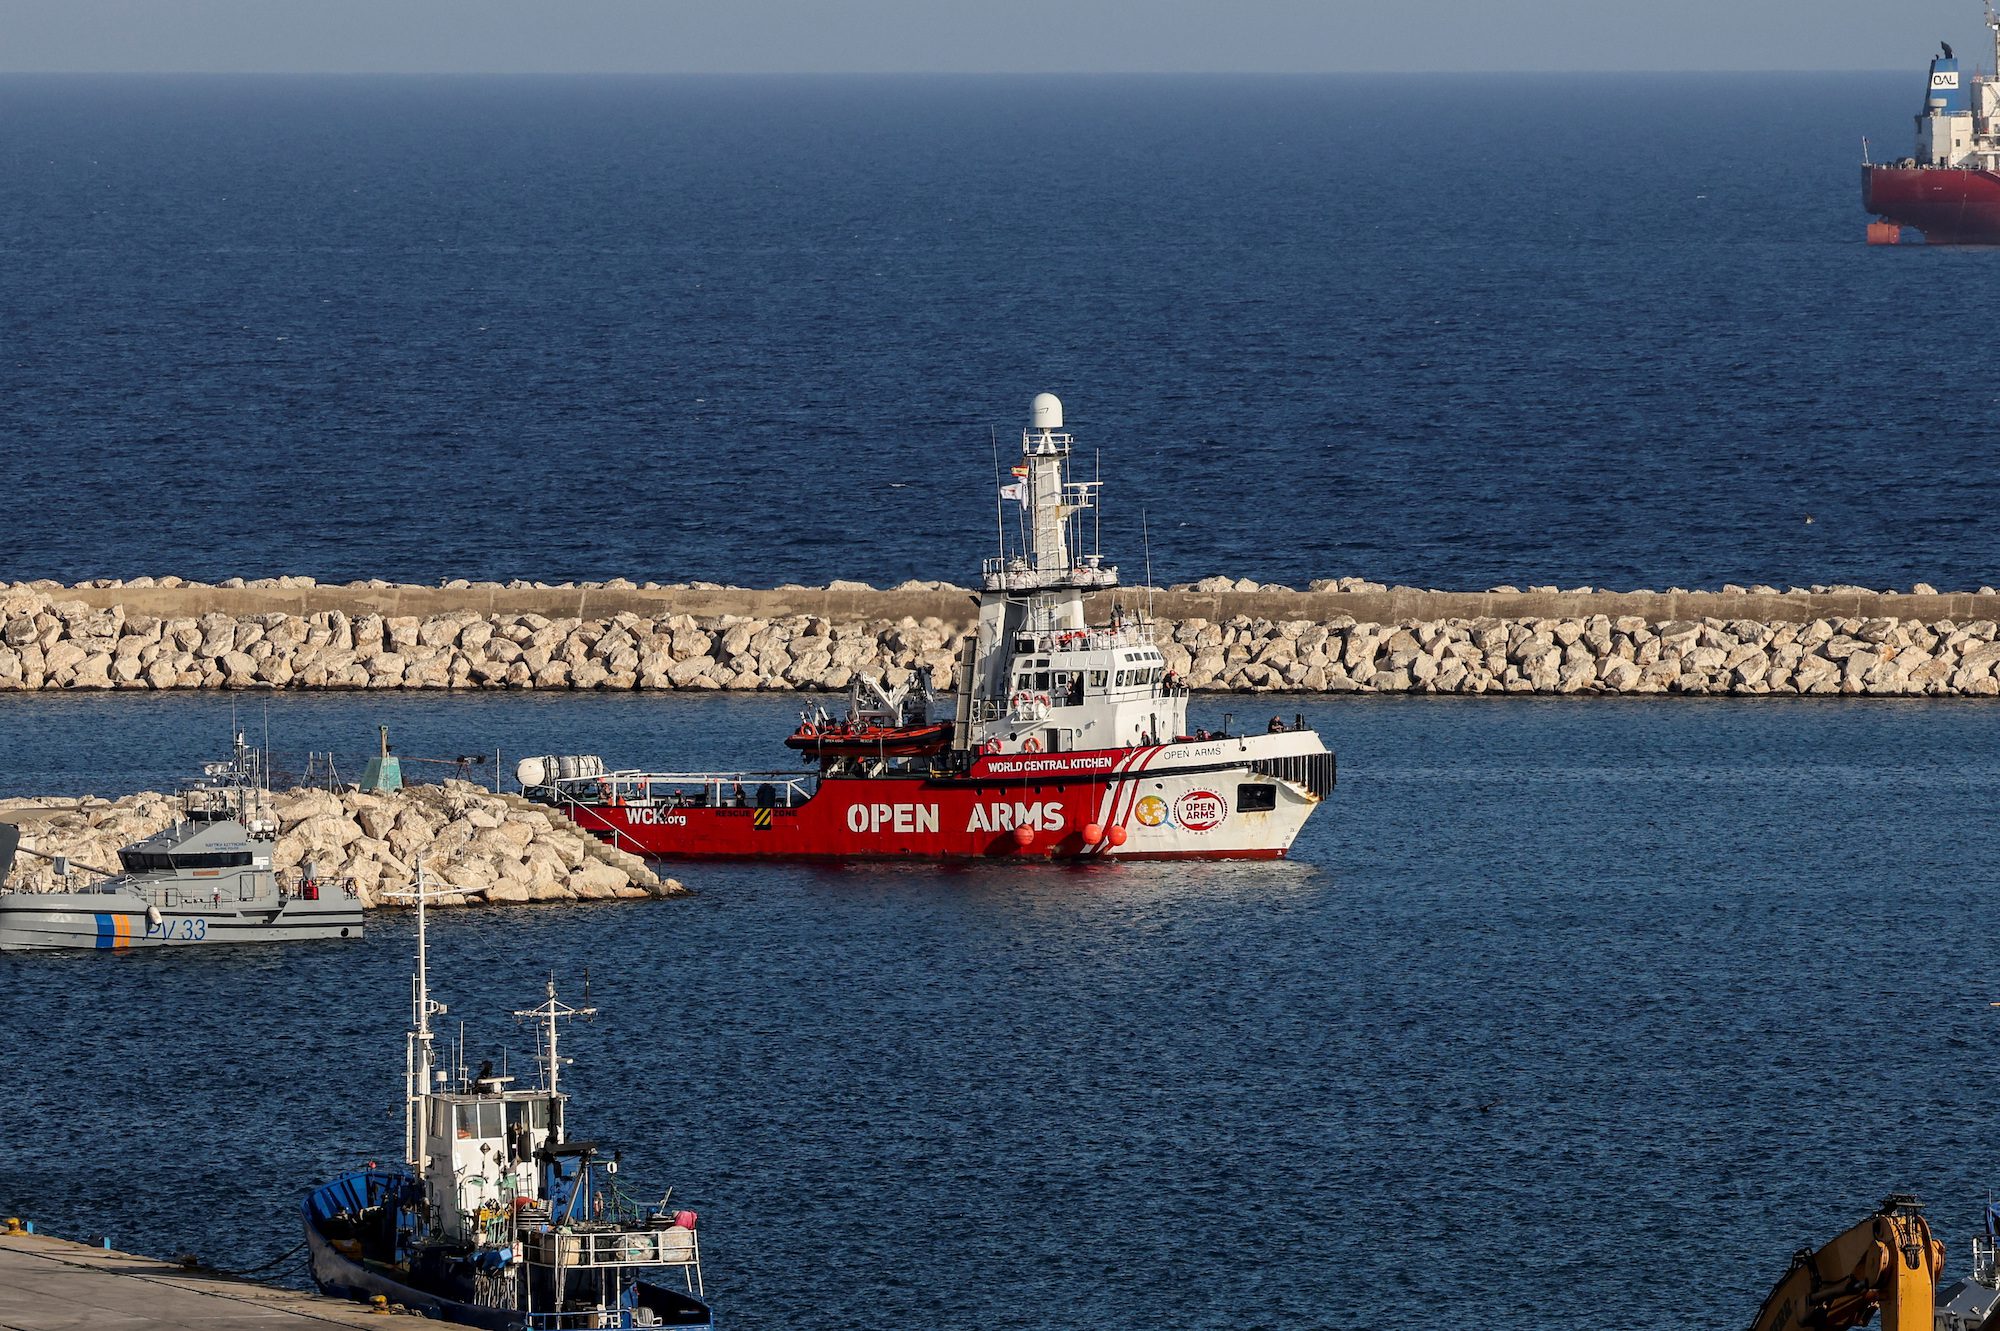 Gaza Aid Ships Return to Cyprus After NGO Worker Deaths